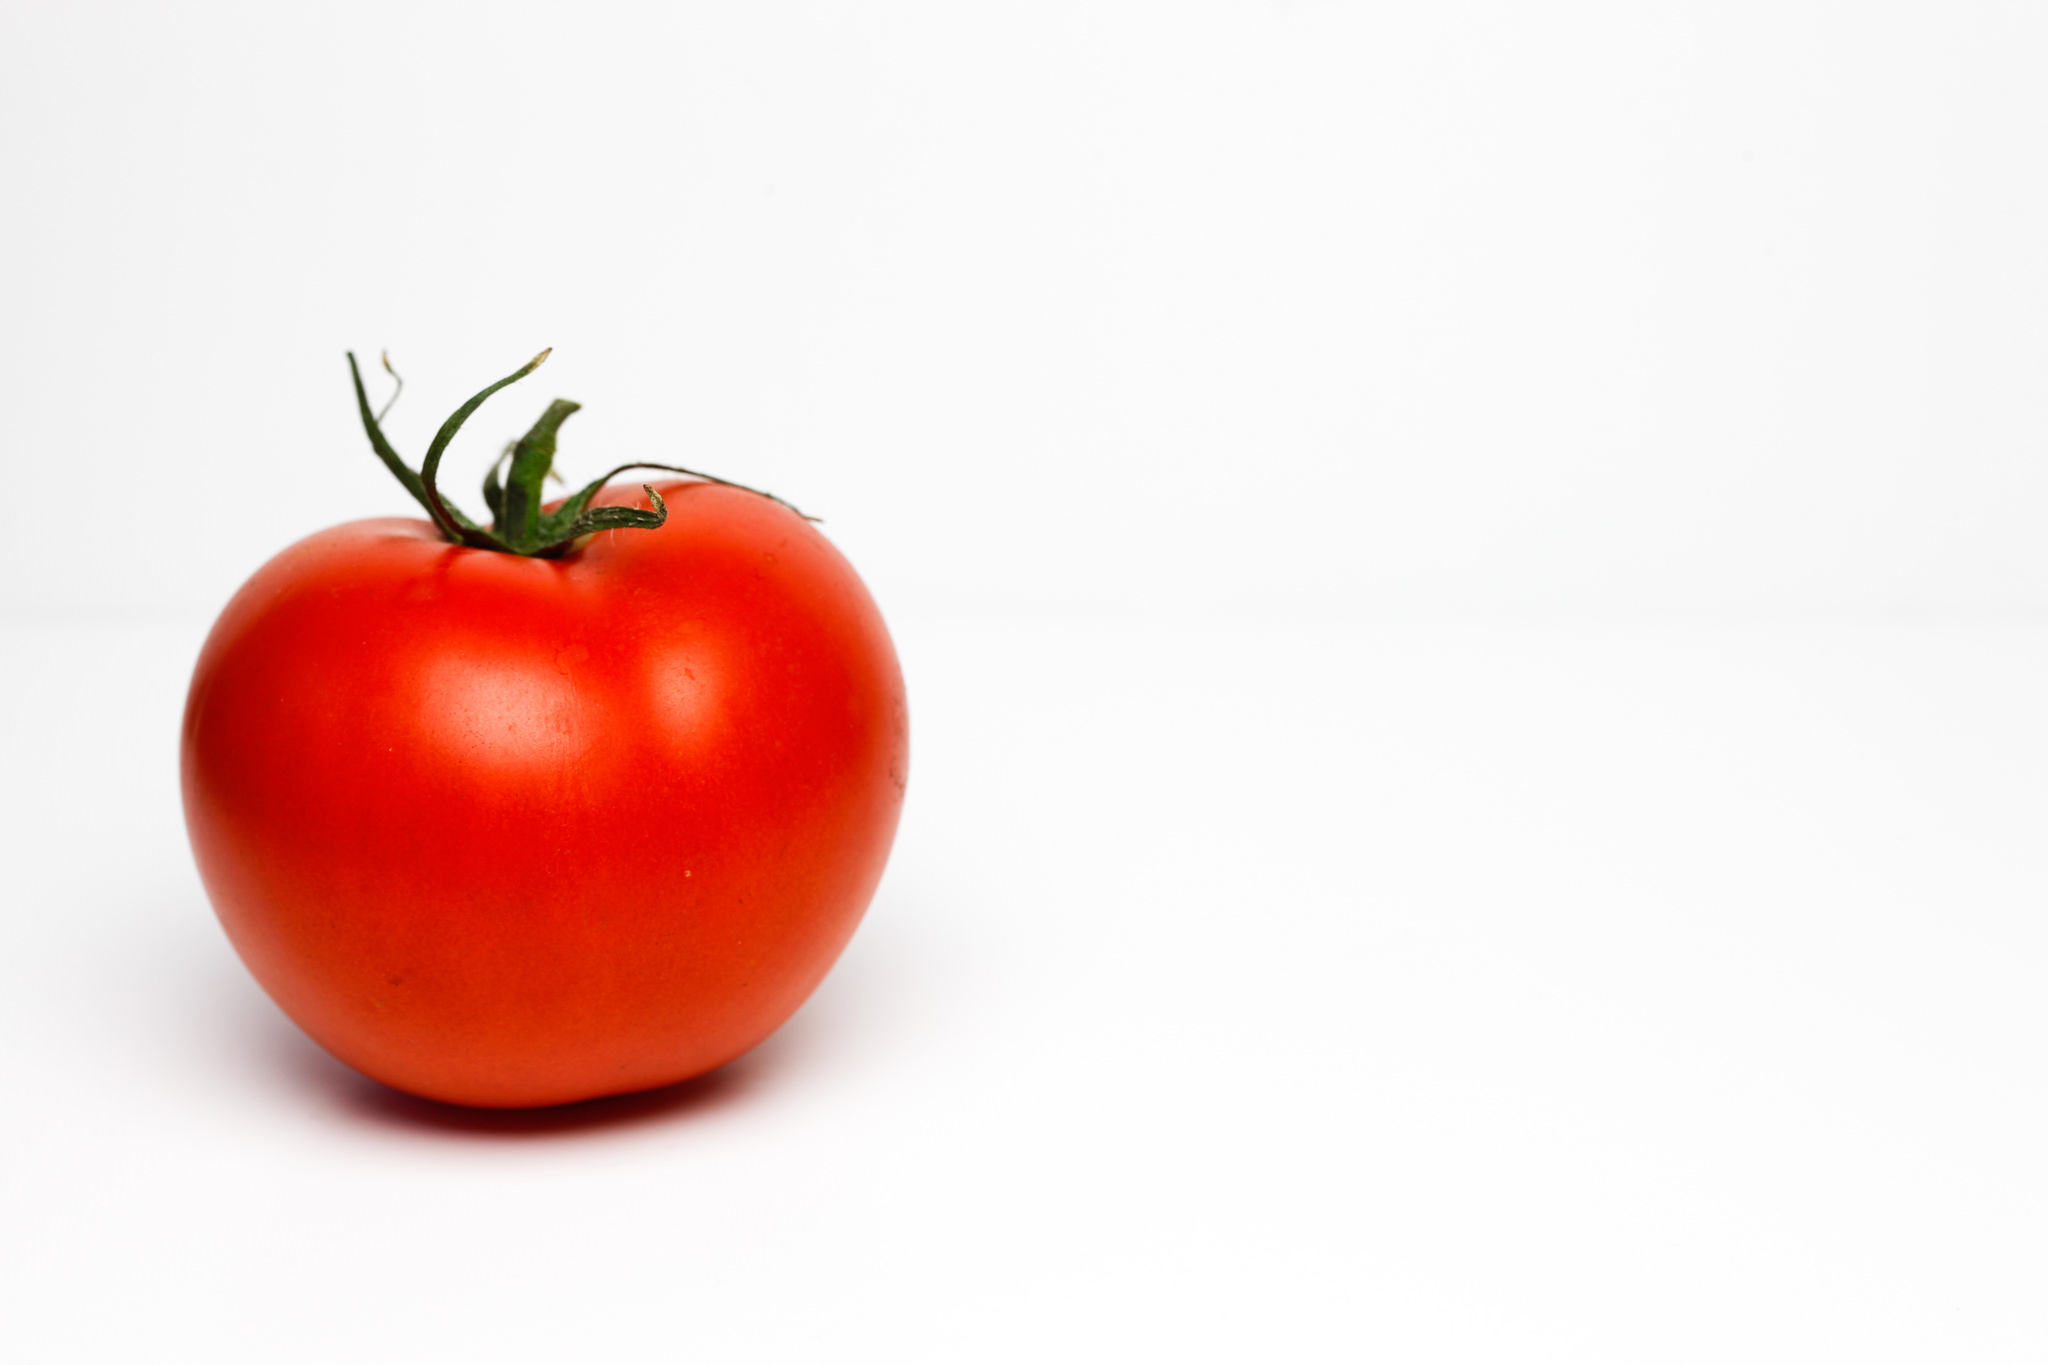 Image of a large tomato on a white background